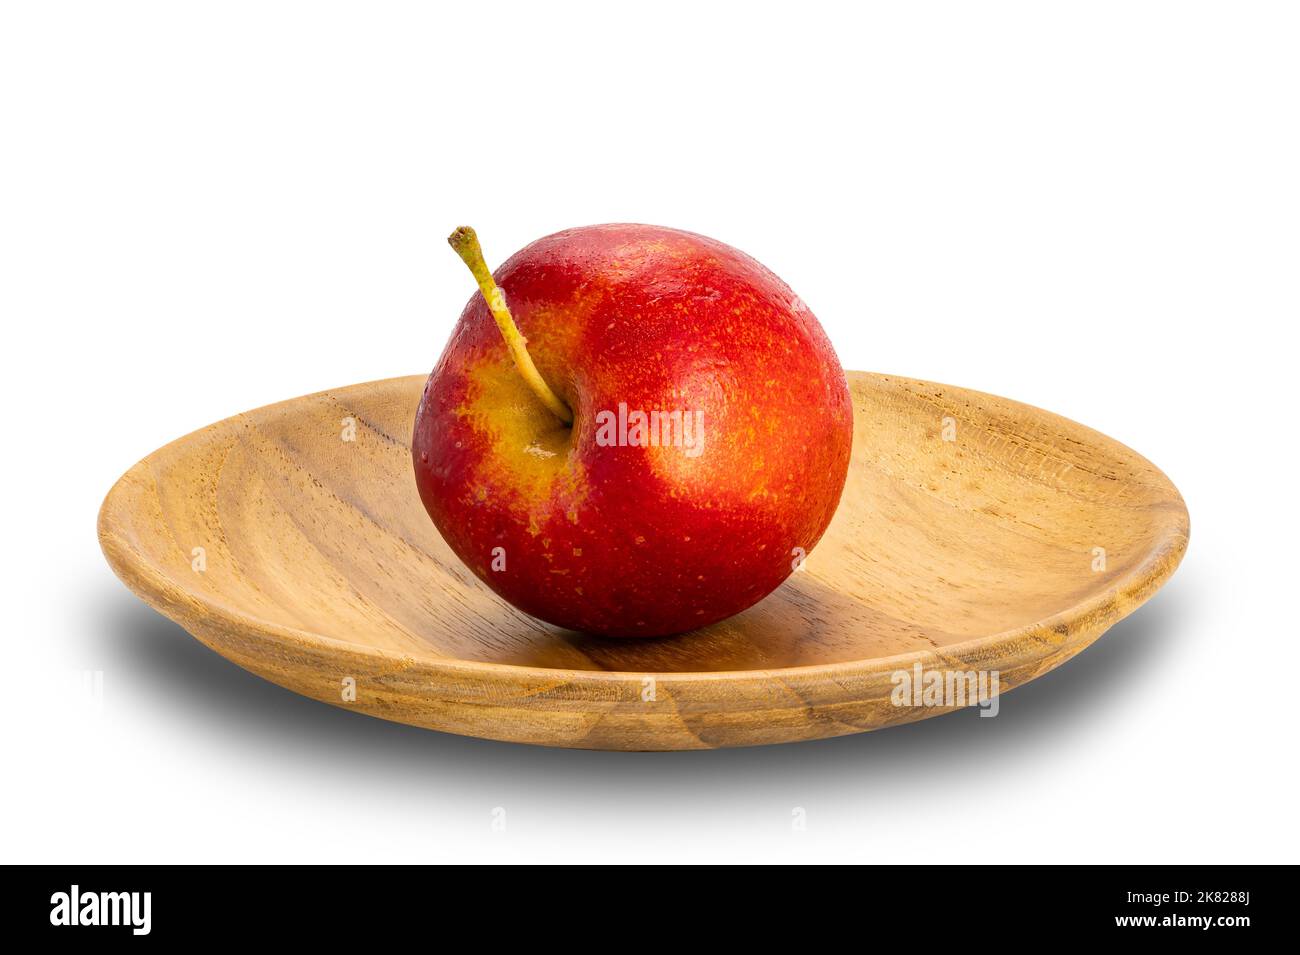 Side view of single fresh ripe crisp snack-size mini apple or little apple or small apple in wooden plate on white background with clipping path. Stock Photo